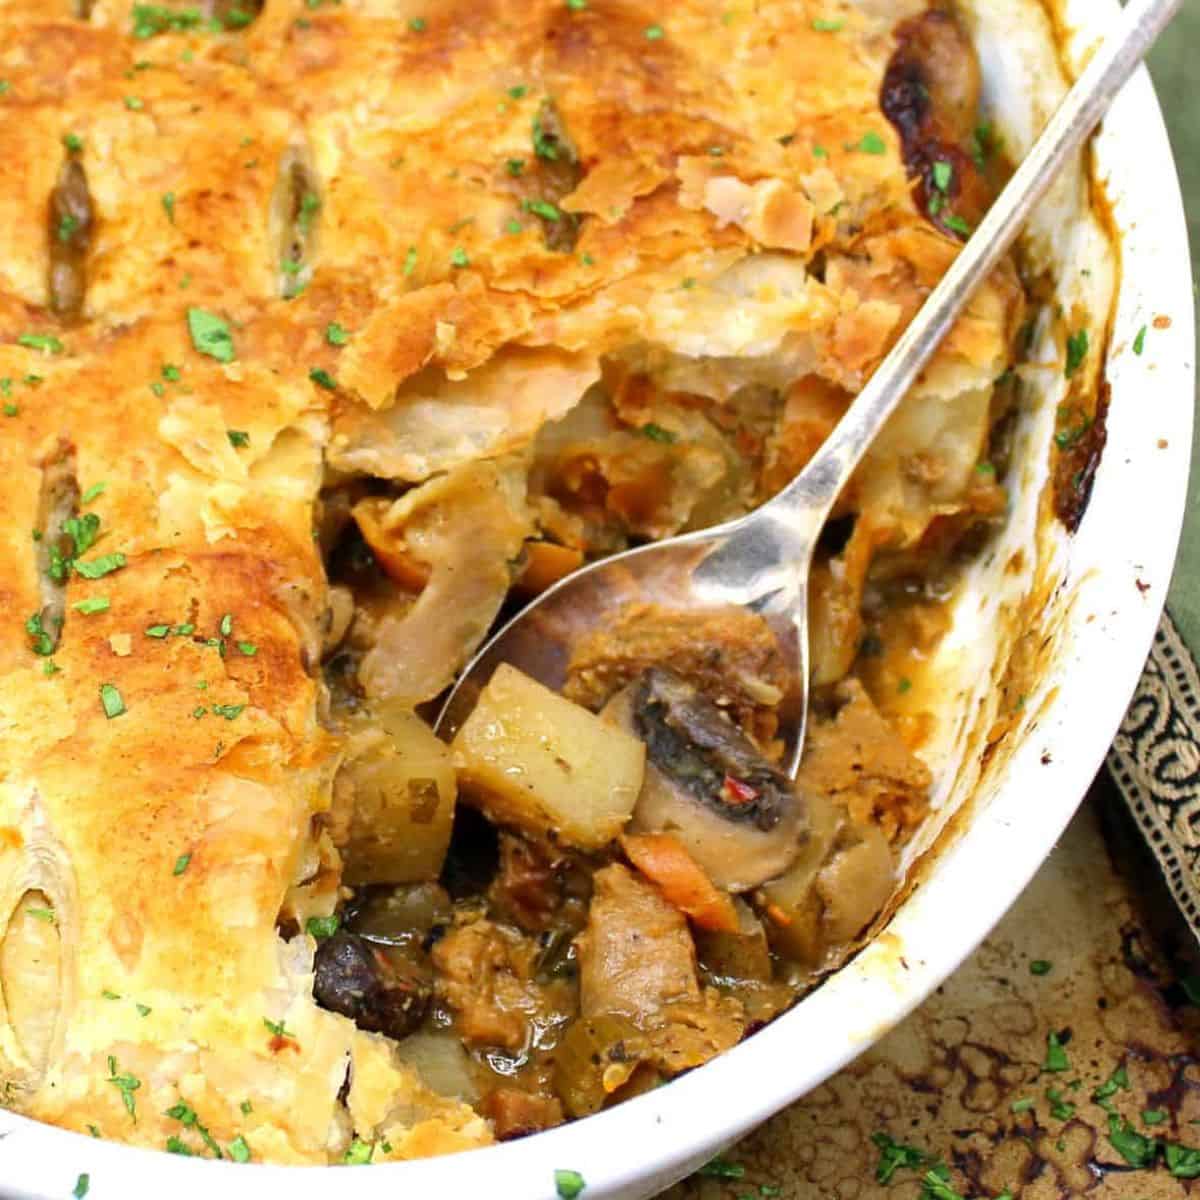 Vegan pot pie with crackly golden crust and a filling of chunky vegetables in a savory stew with spoon.